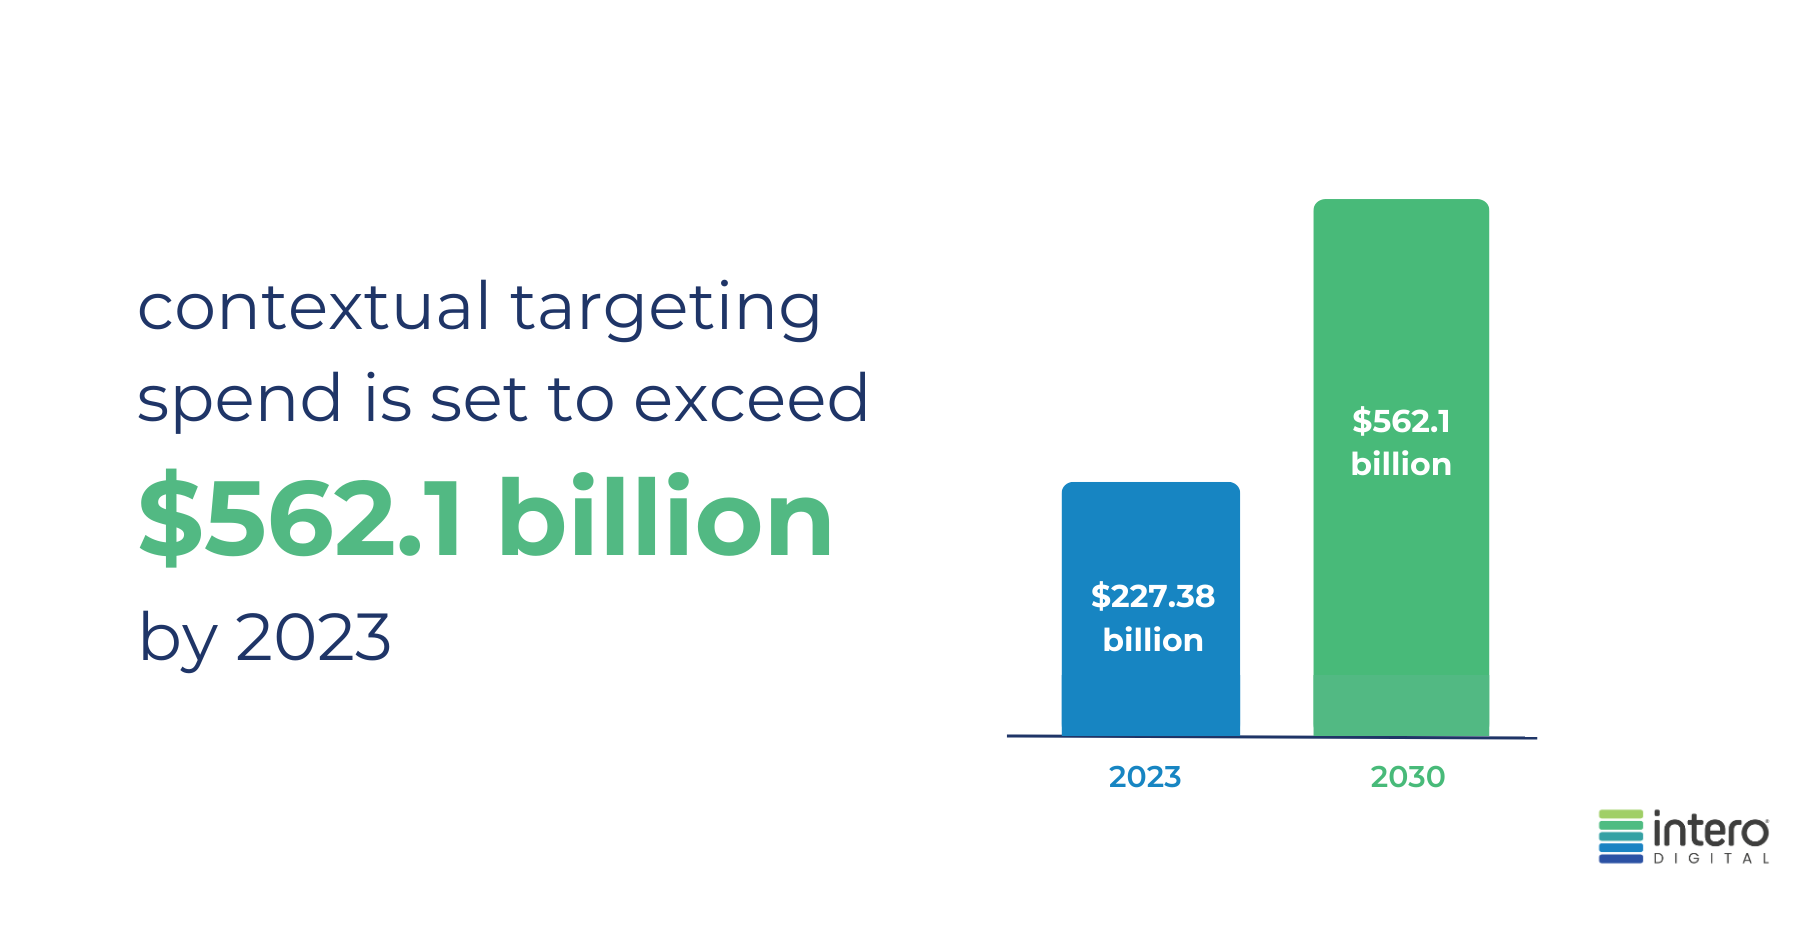 contextual targeting spend is set to exceed $562.1 billion by 2030. It was $227.38 billion in 2023.